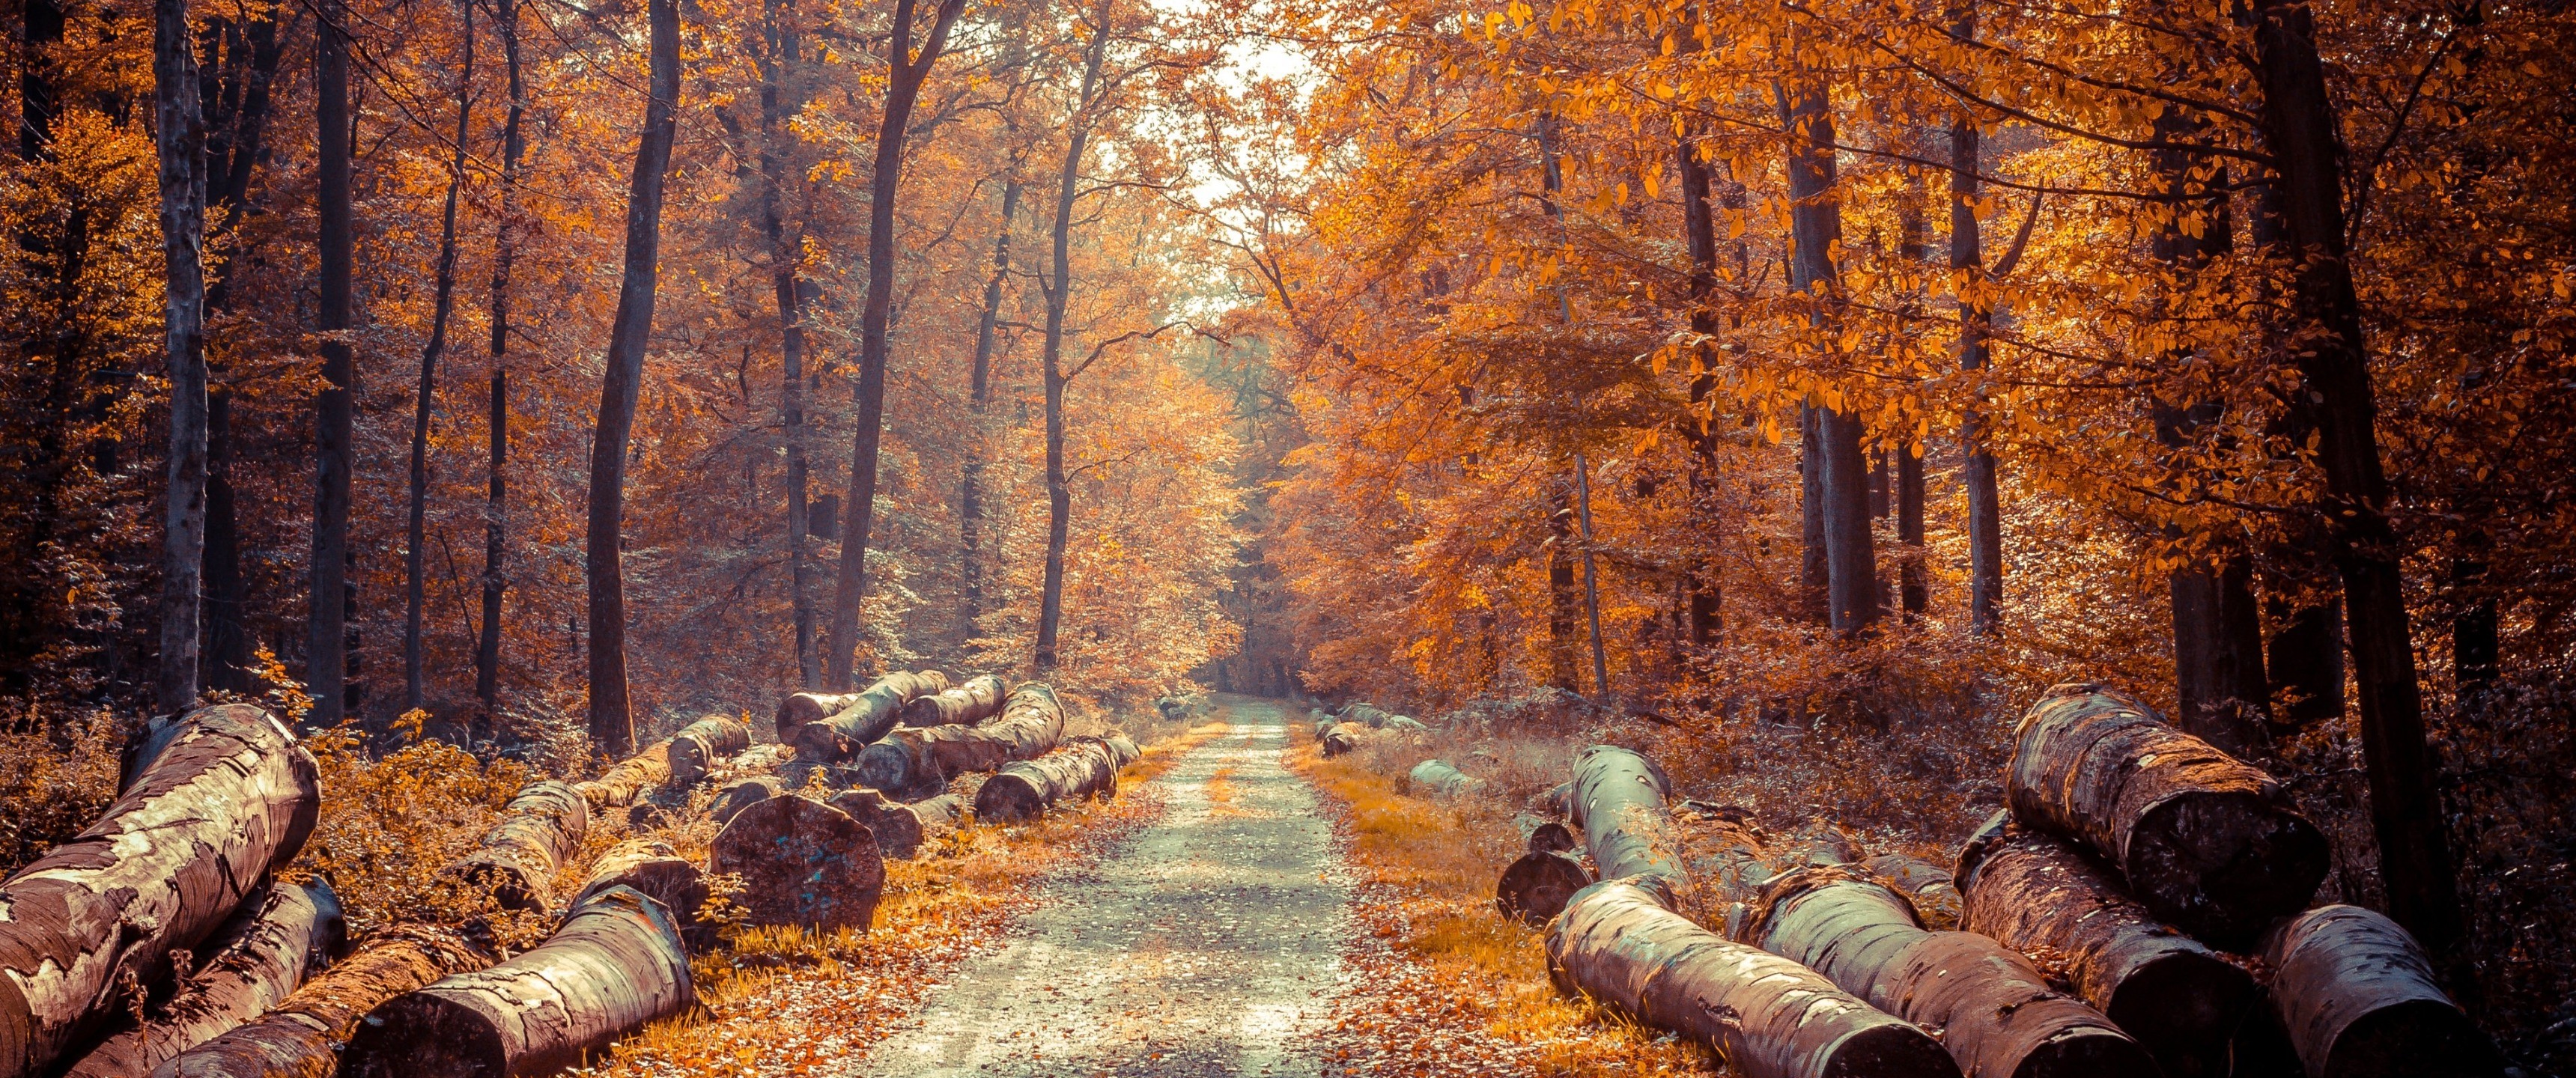 General 3440x1440 log fall forest nature trees path